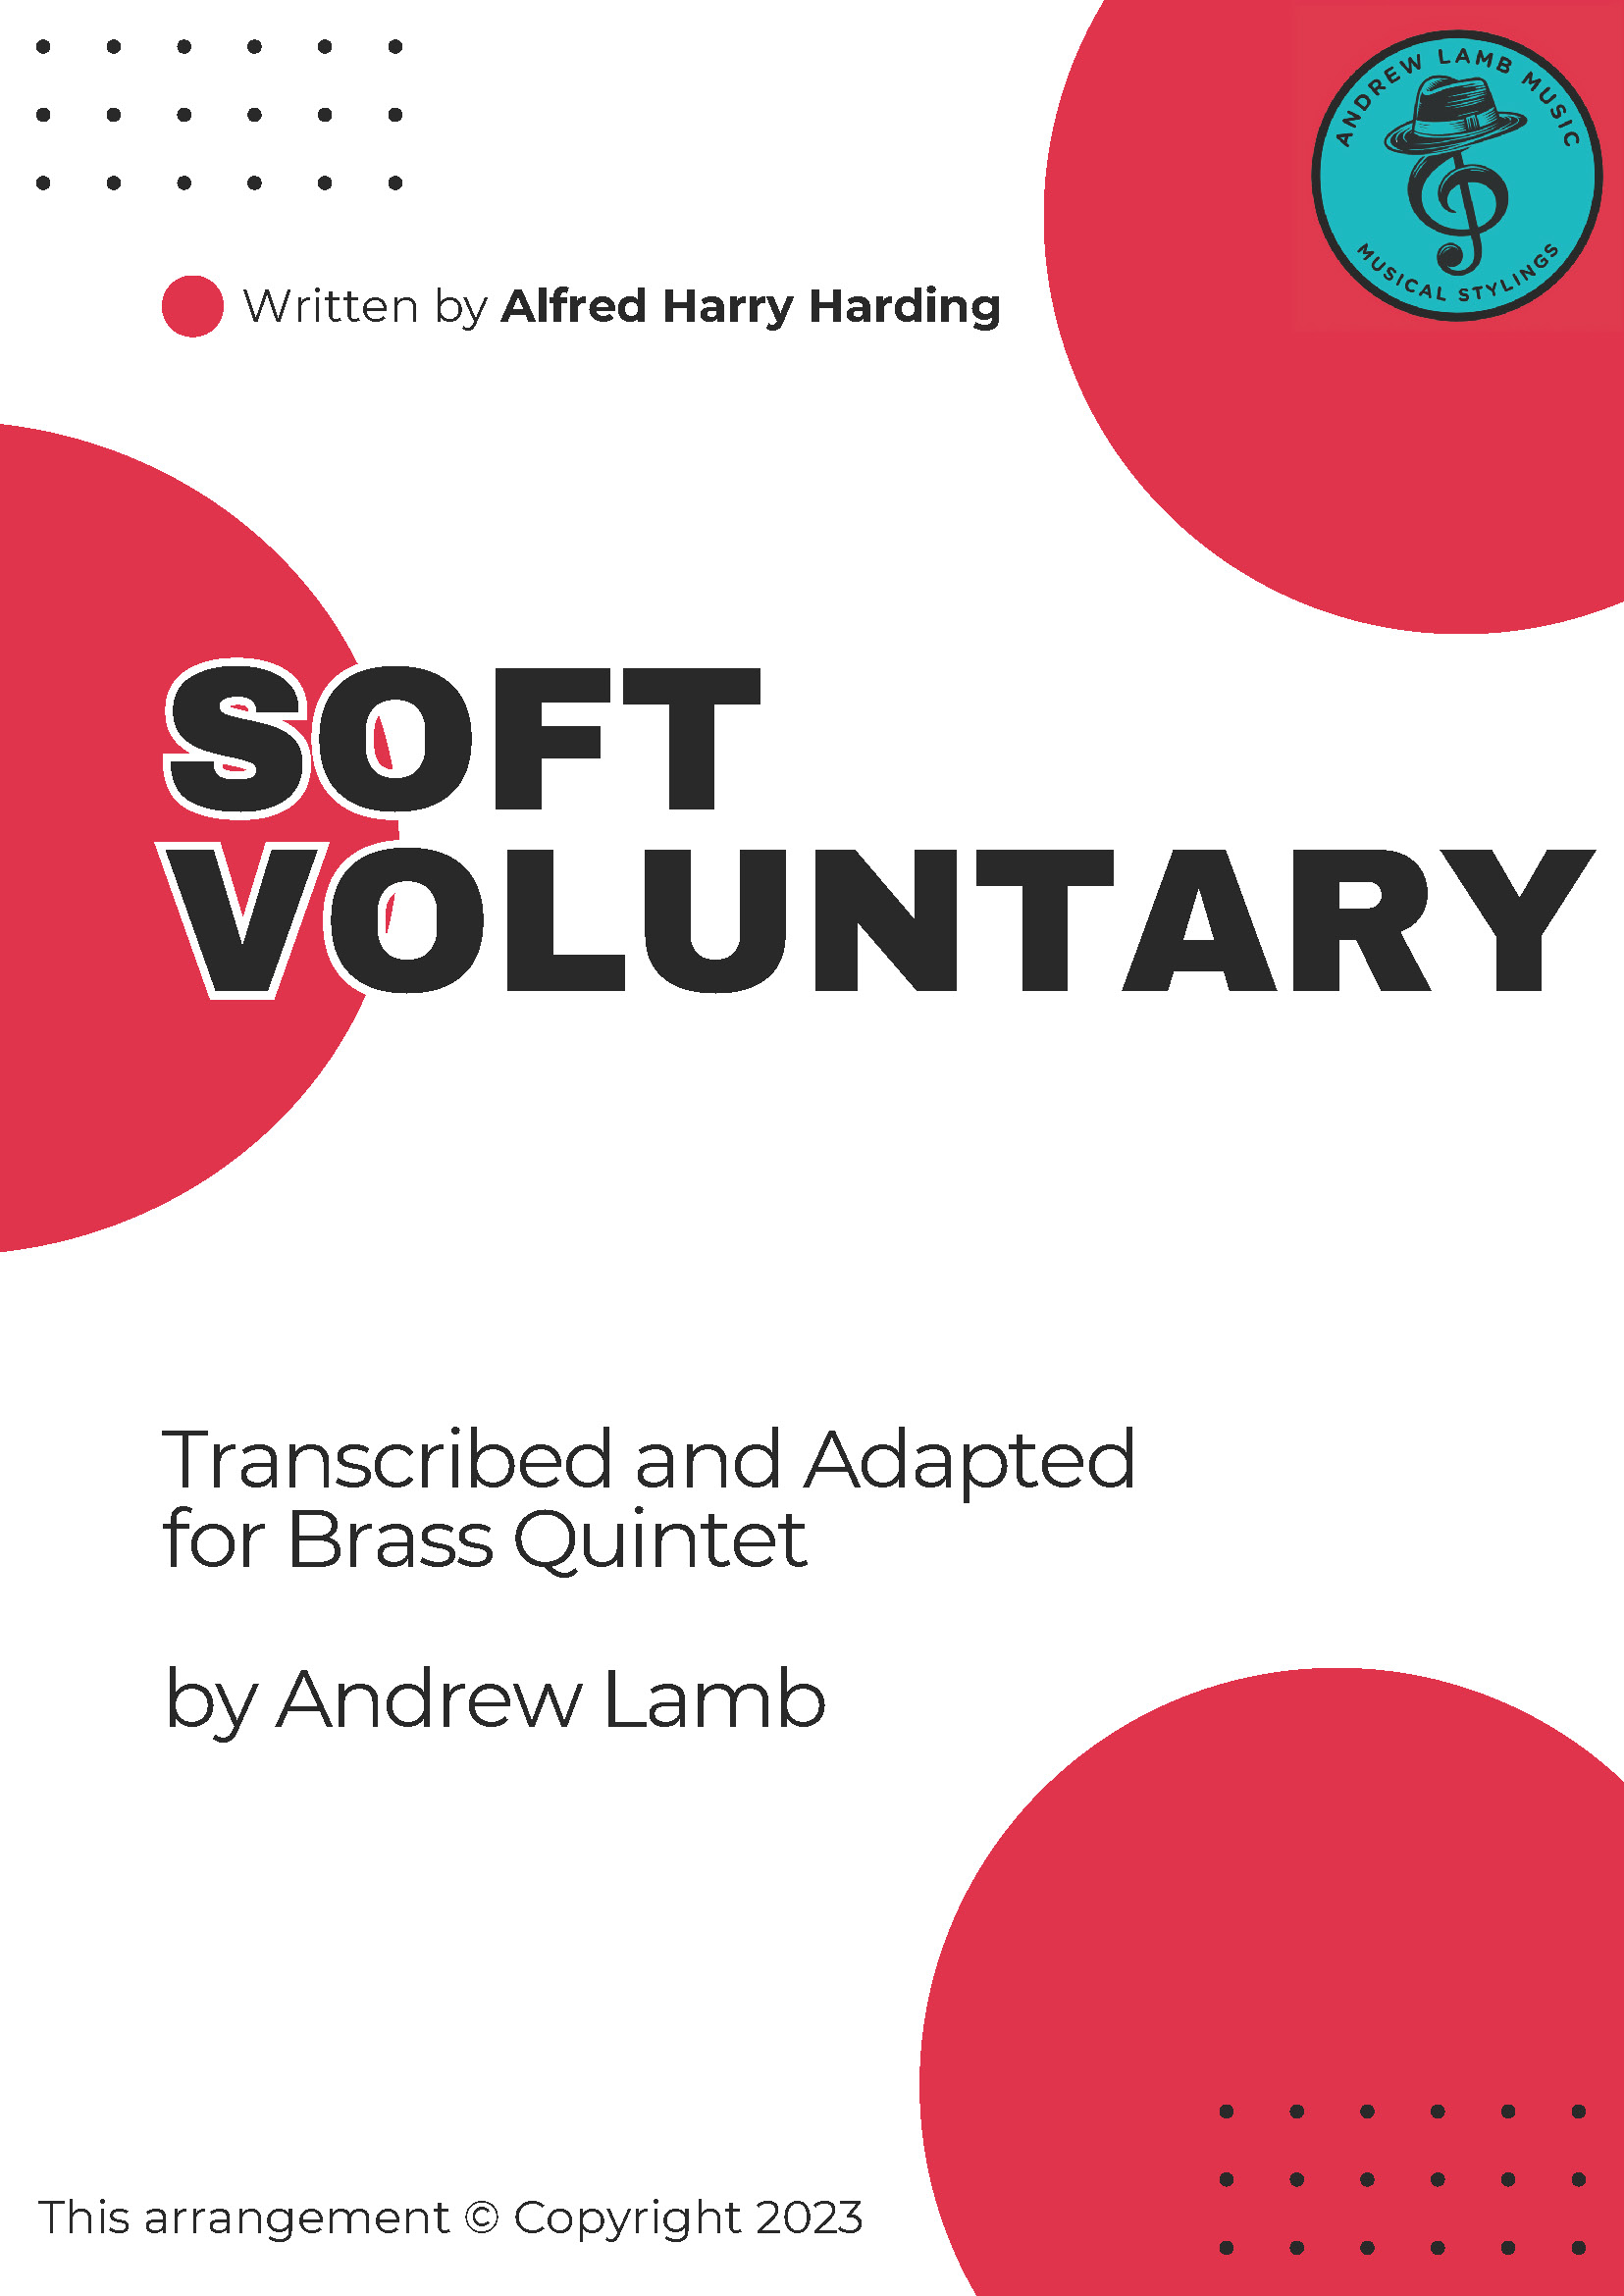 Brass Quintet Cover 1 Page 1